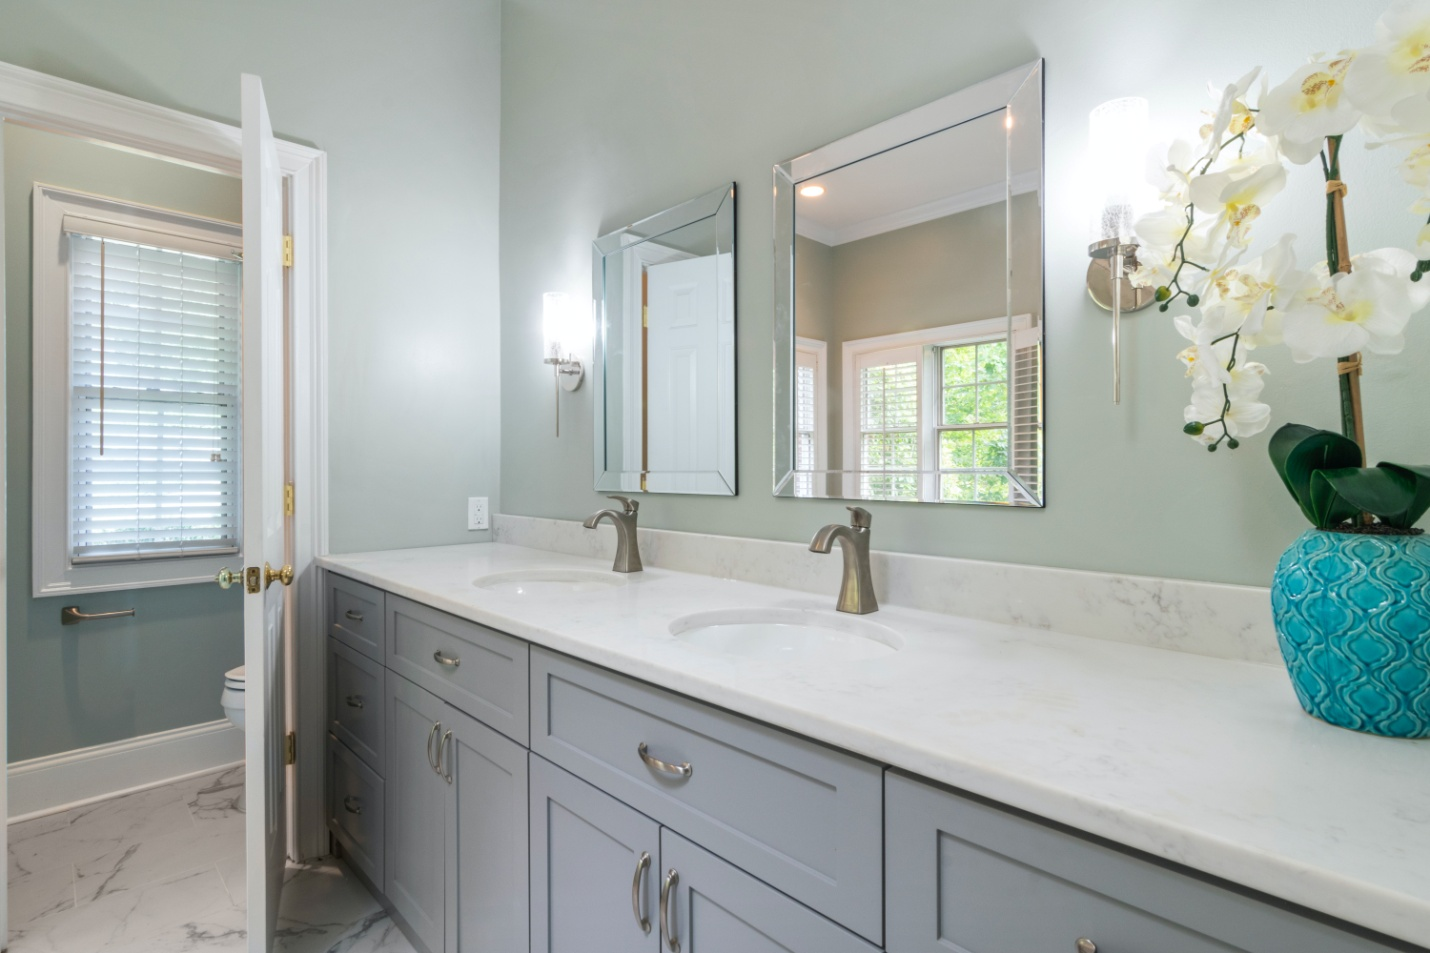 How to Choose the Right Bathroom Sink